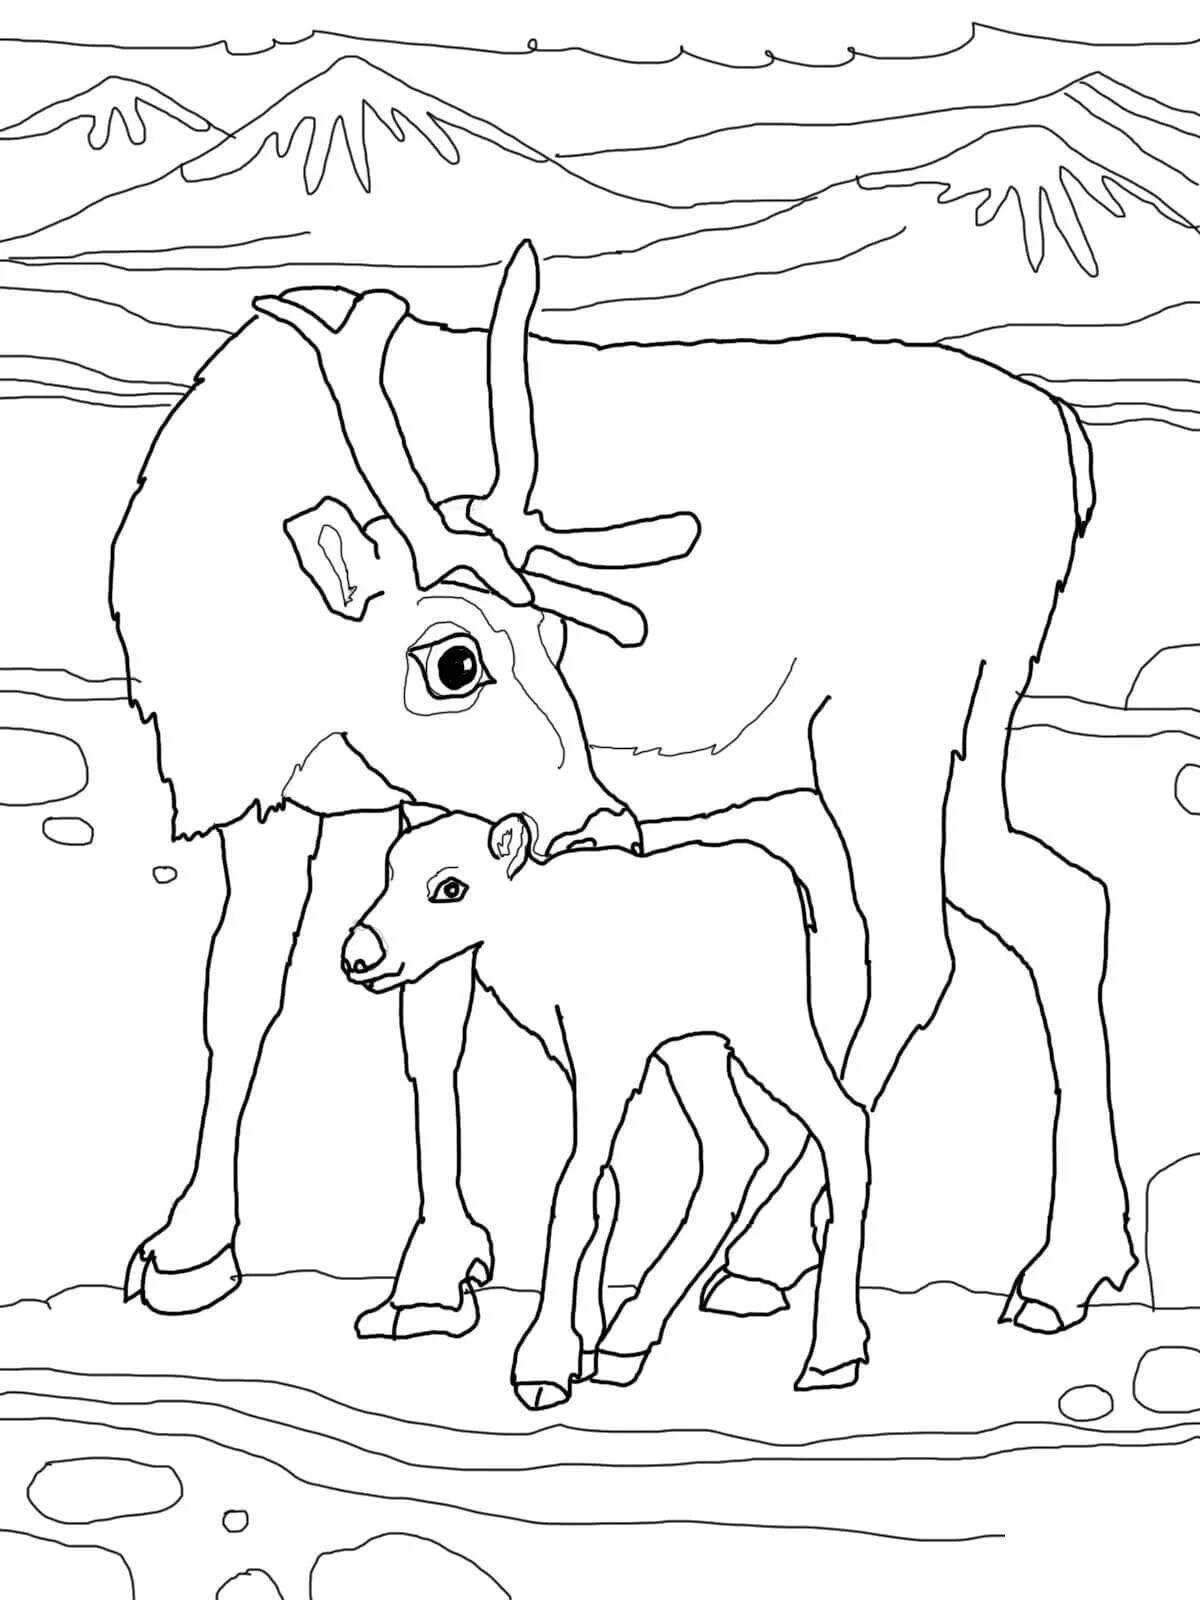 Coloring book magical animals of the far north